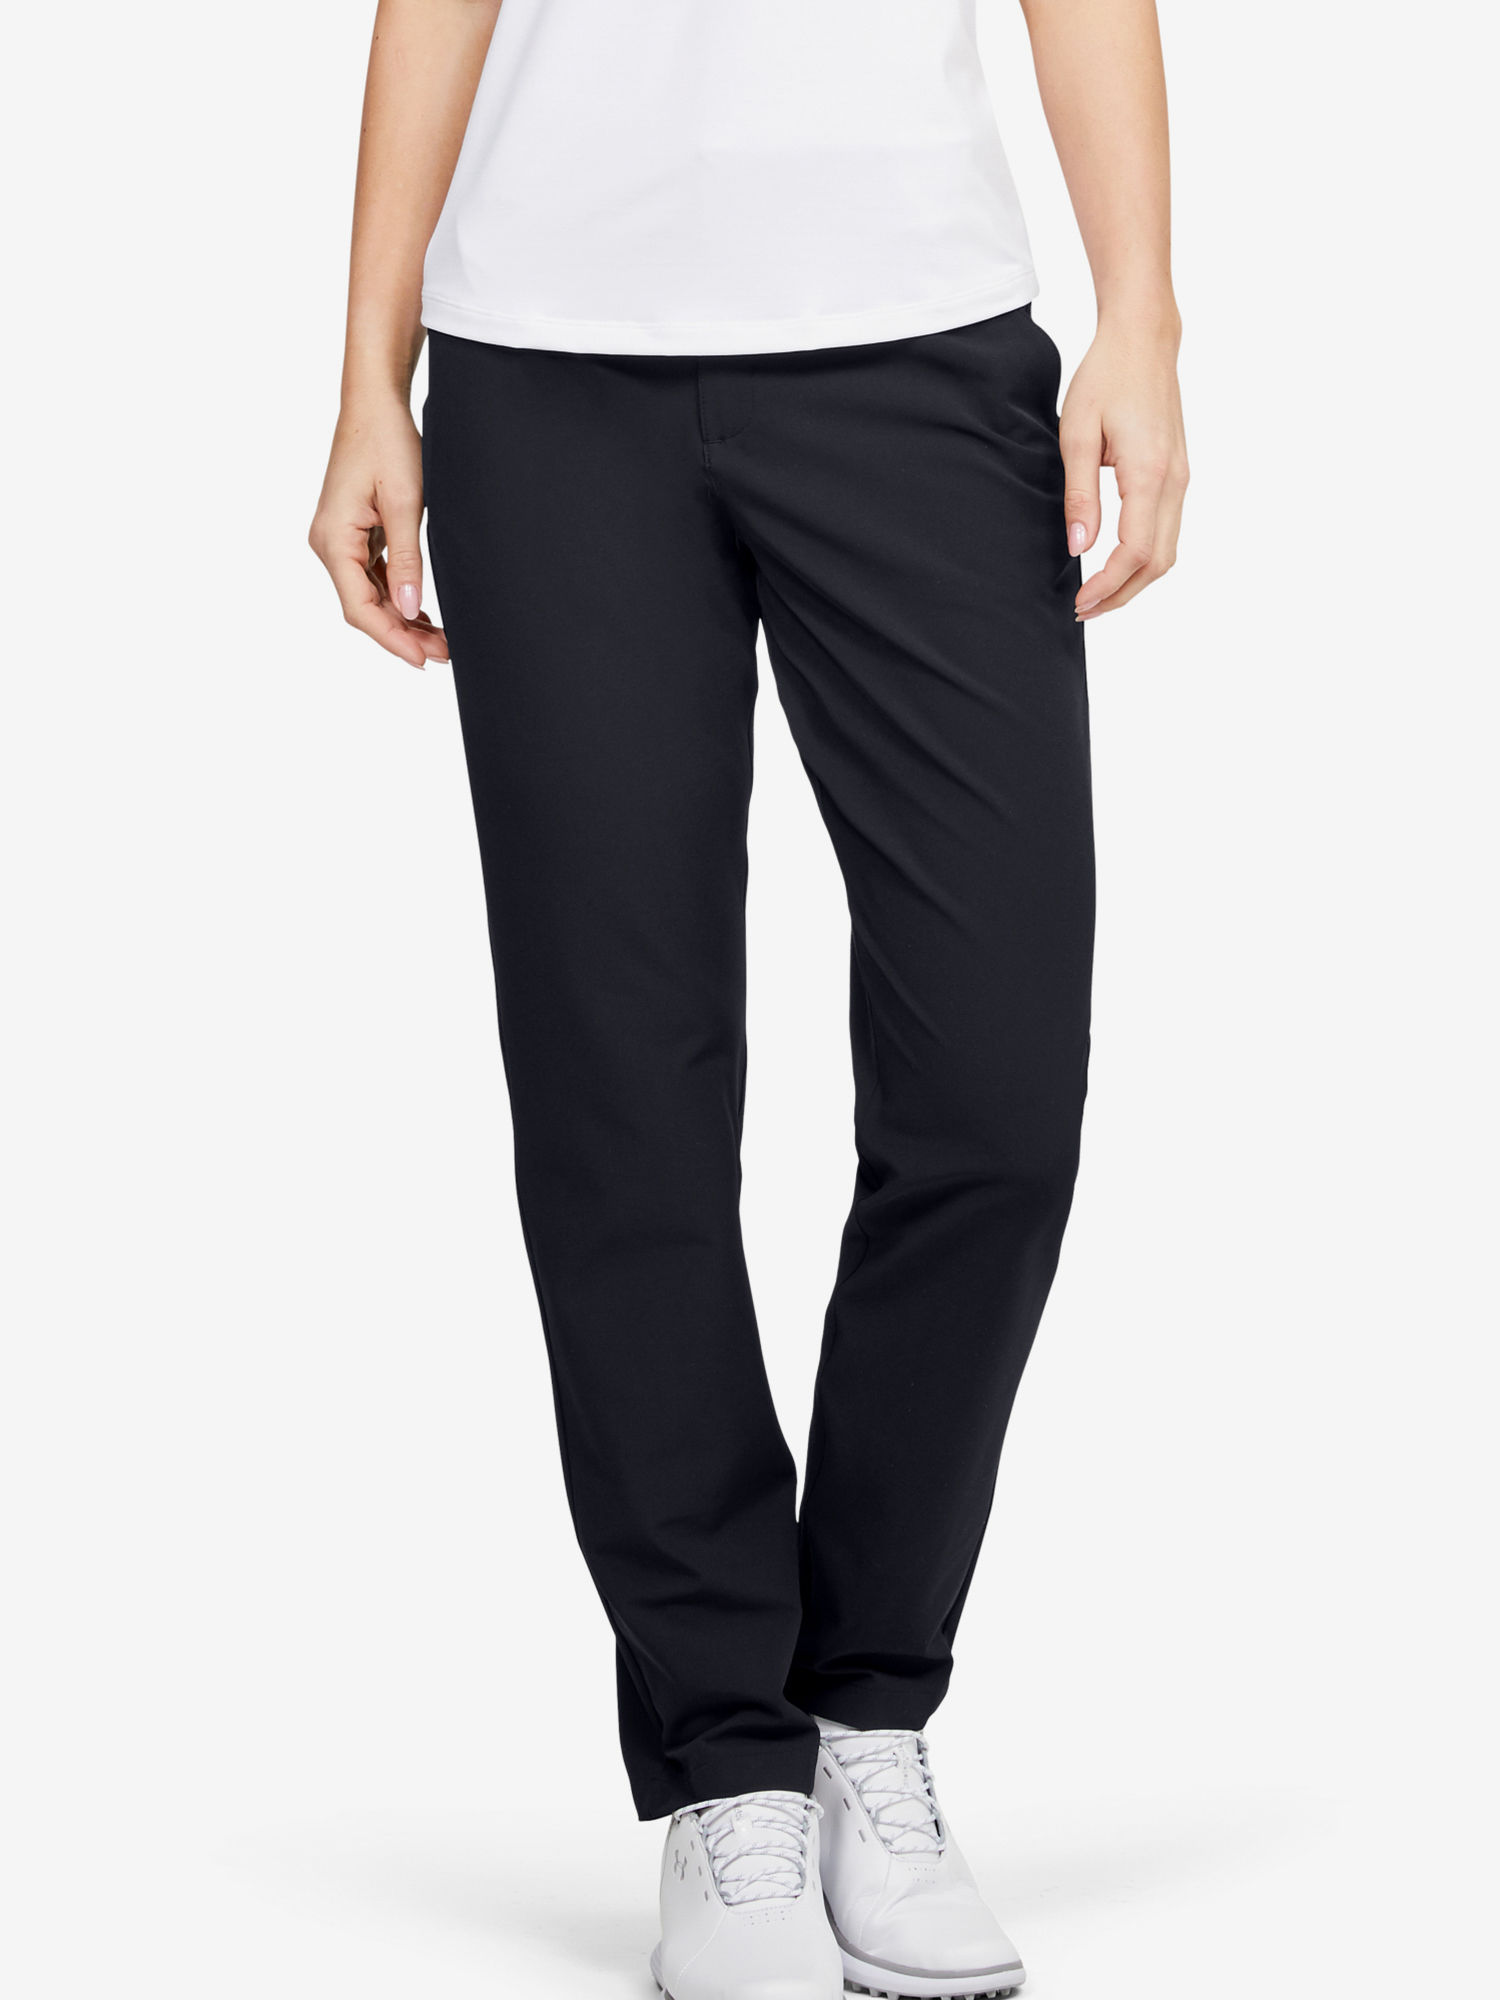 Nohavice Under Armour Links Pant-BLK (1)